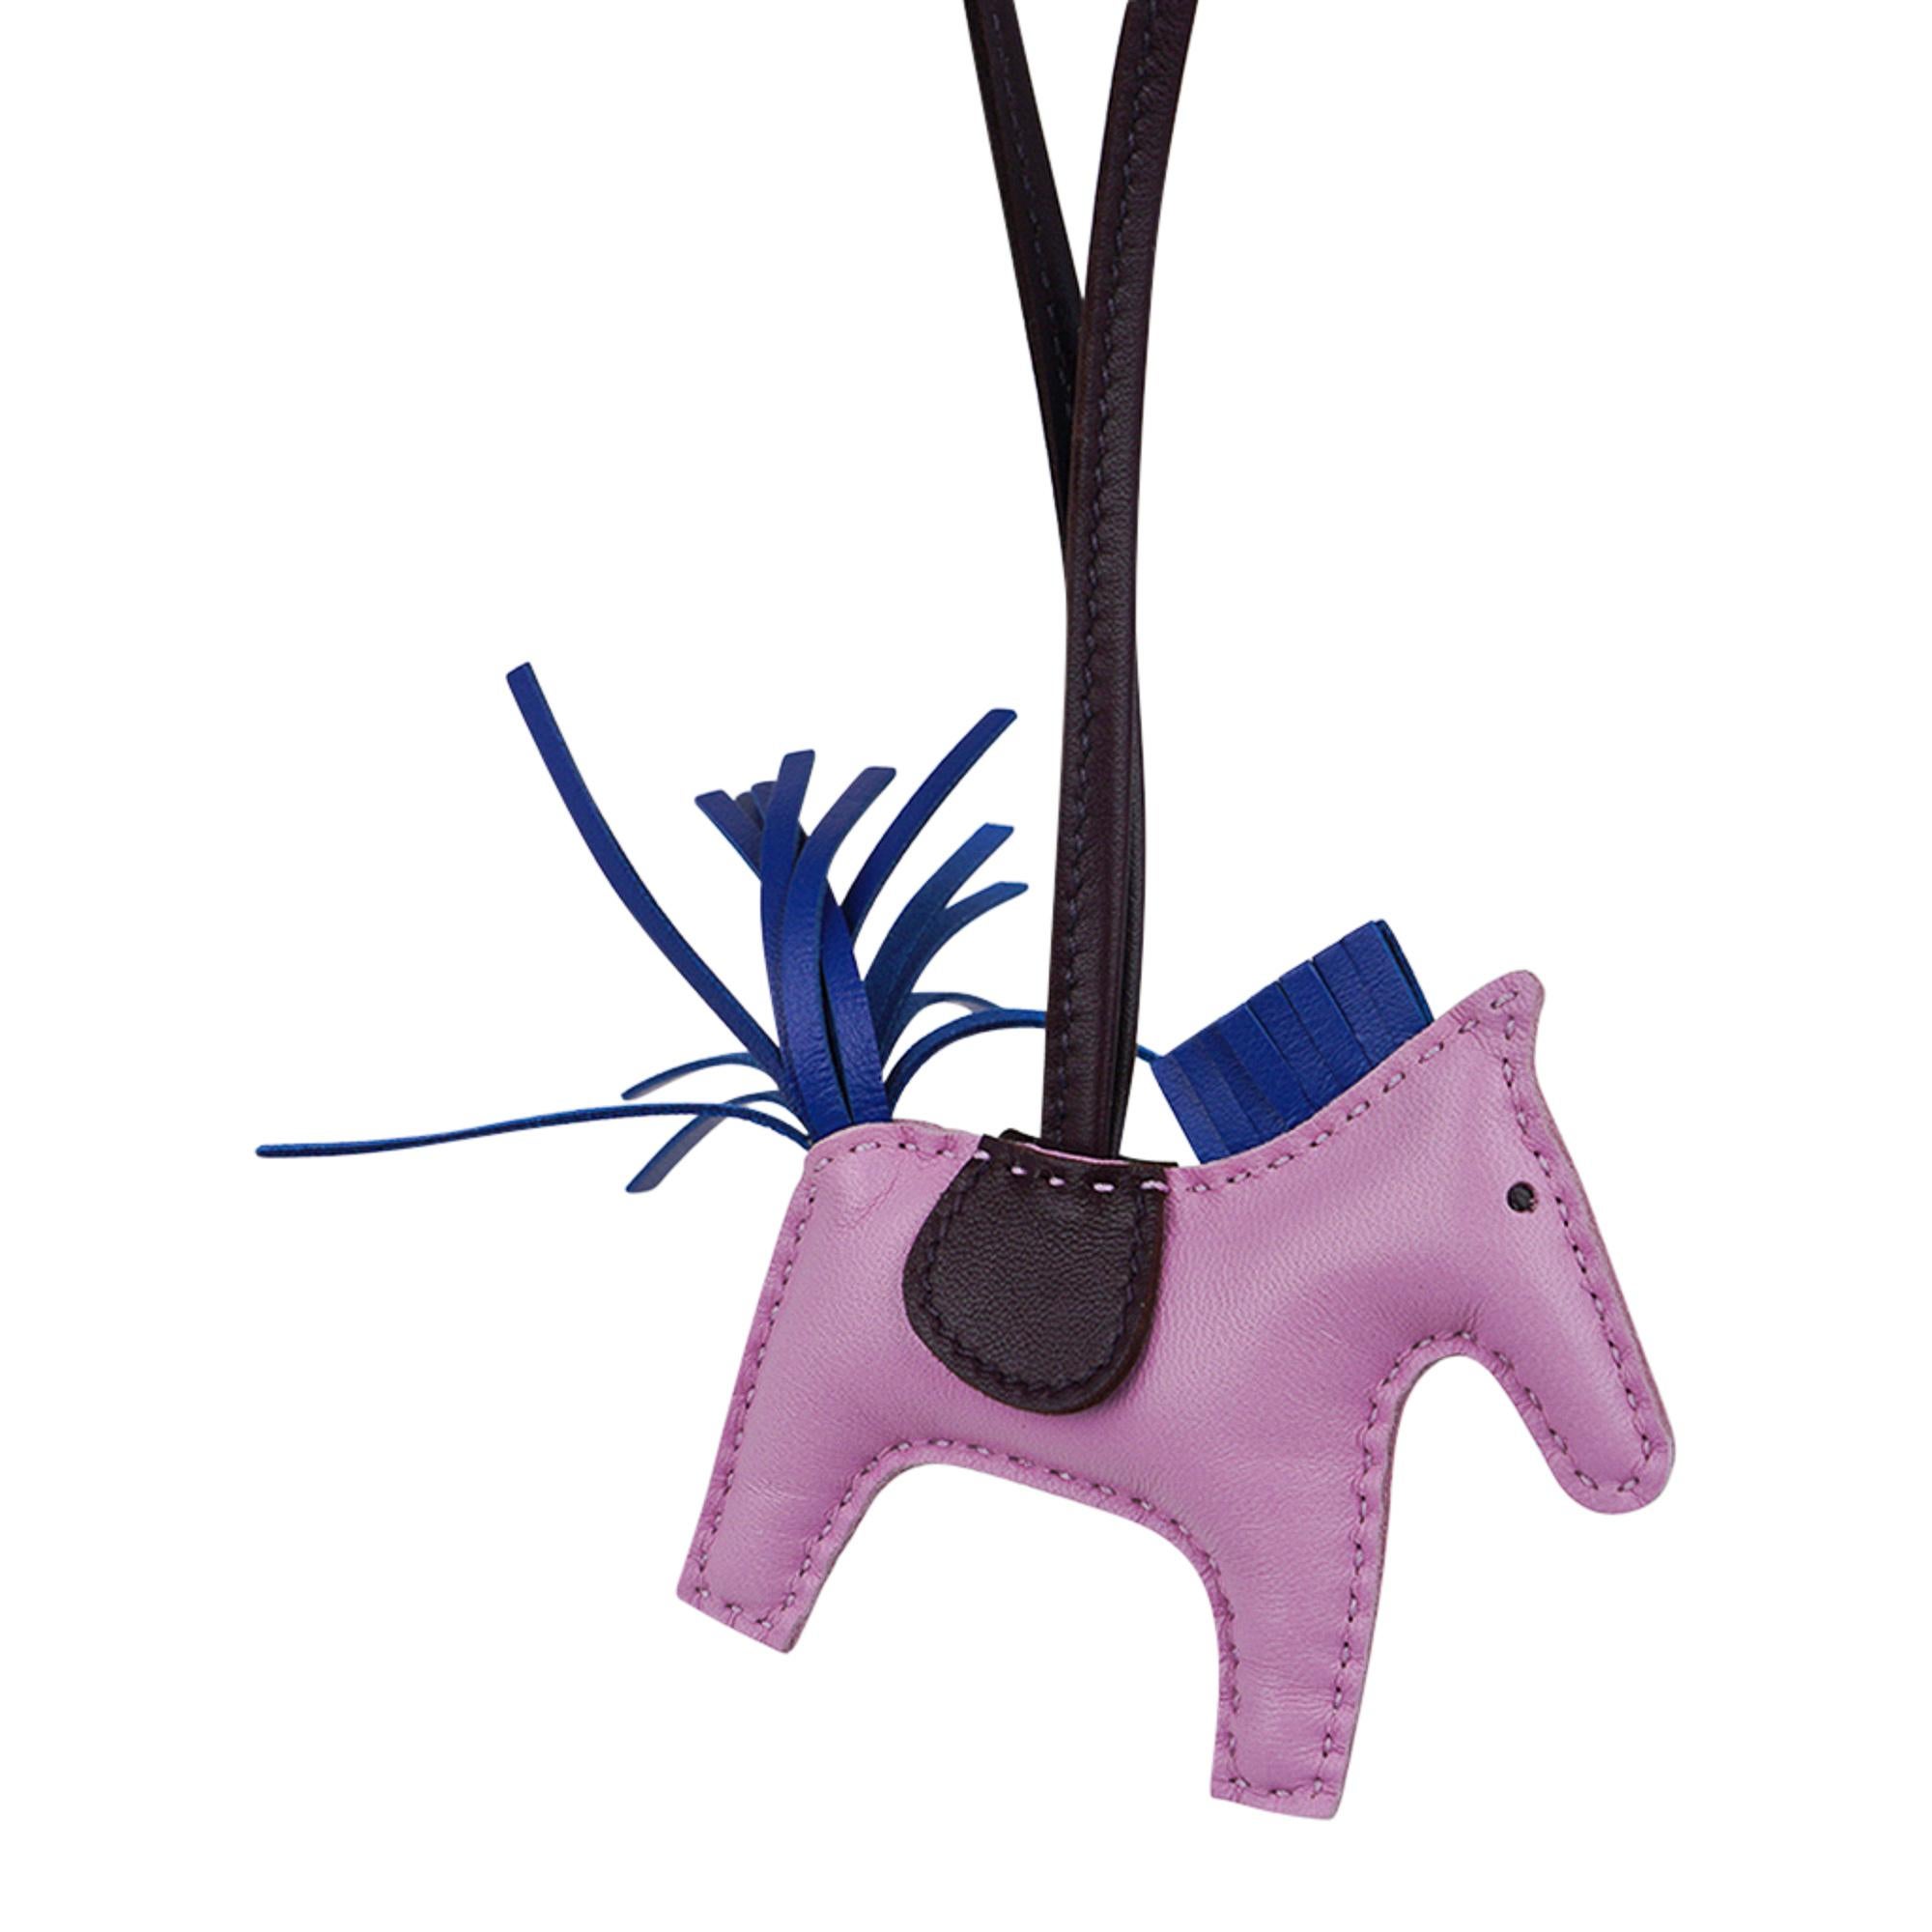 Mightychic offers an Hermes PM Rodeo bag charm featured in Mauve Sylvestre, Blue de France and Rouge Sellier.
Charming and playful she easily adorns a myriad bag colors in your fabulous collection.
Skin is Milo lambskin.
Signature HERMES PARIS MADE